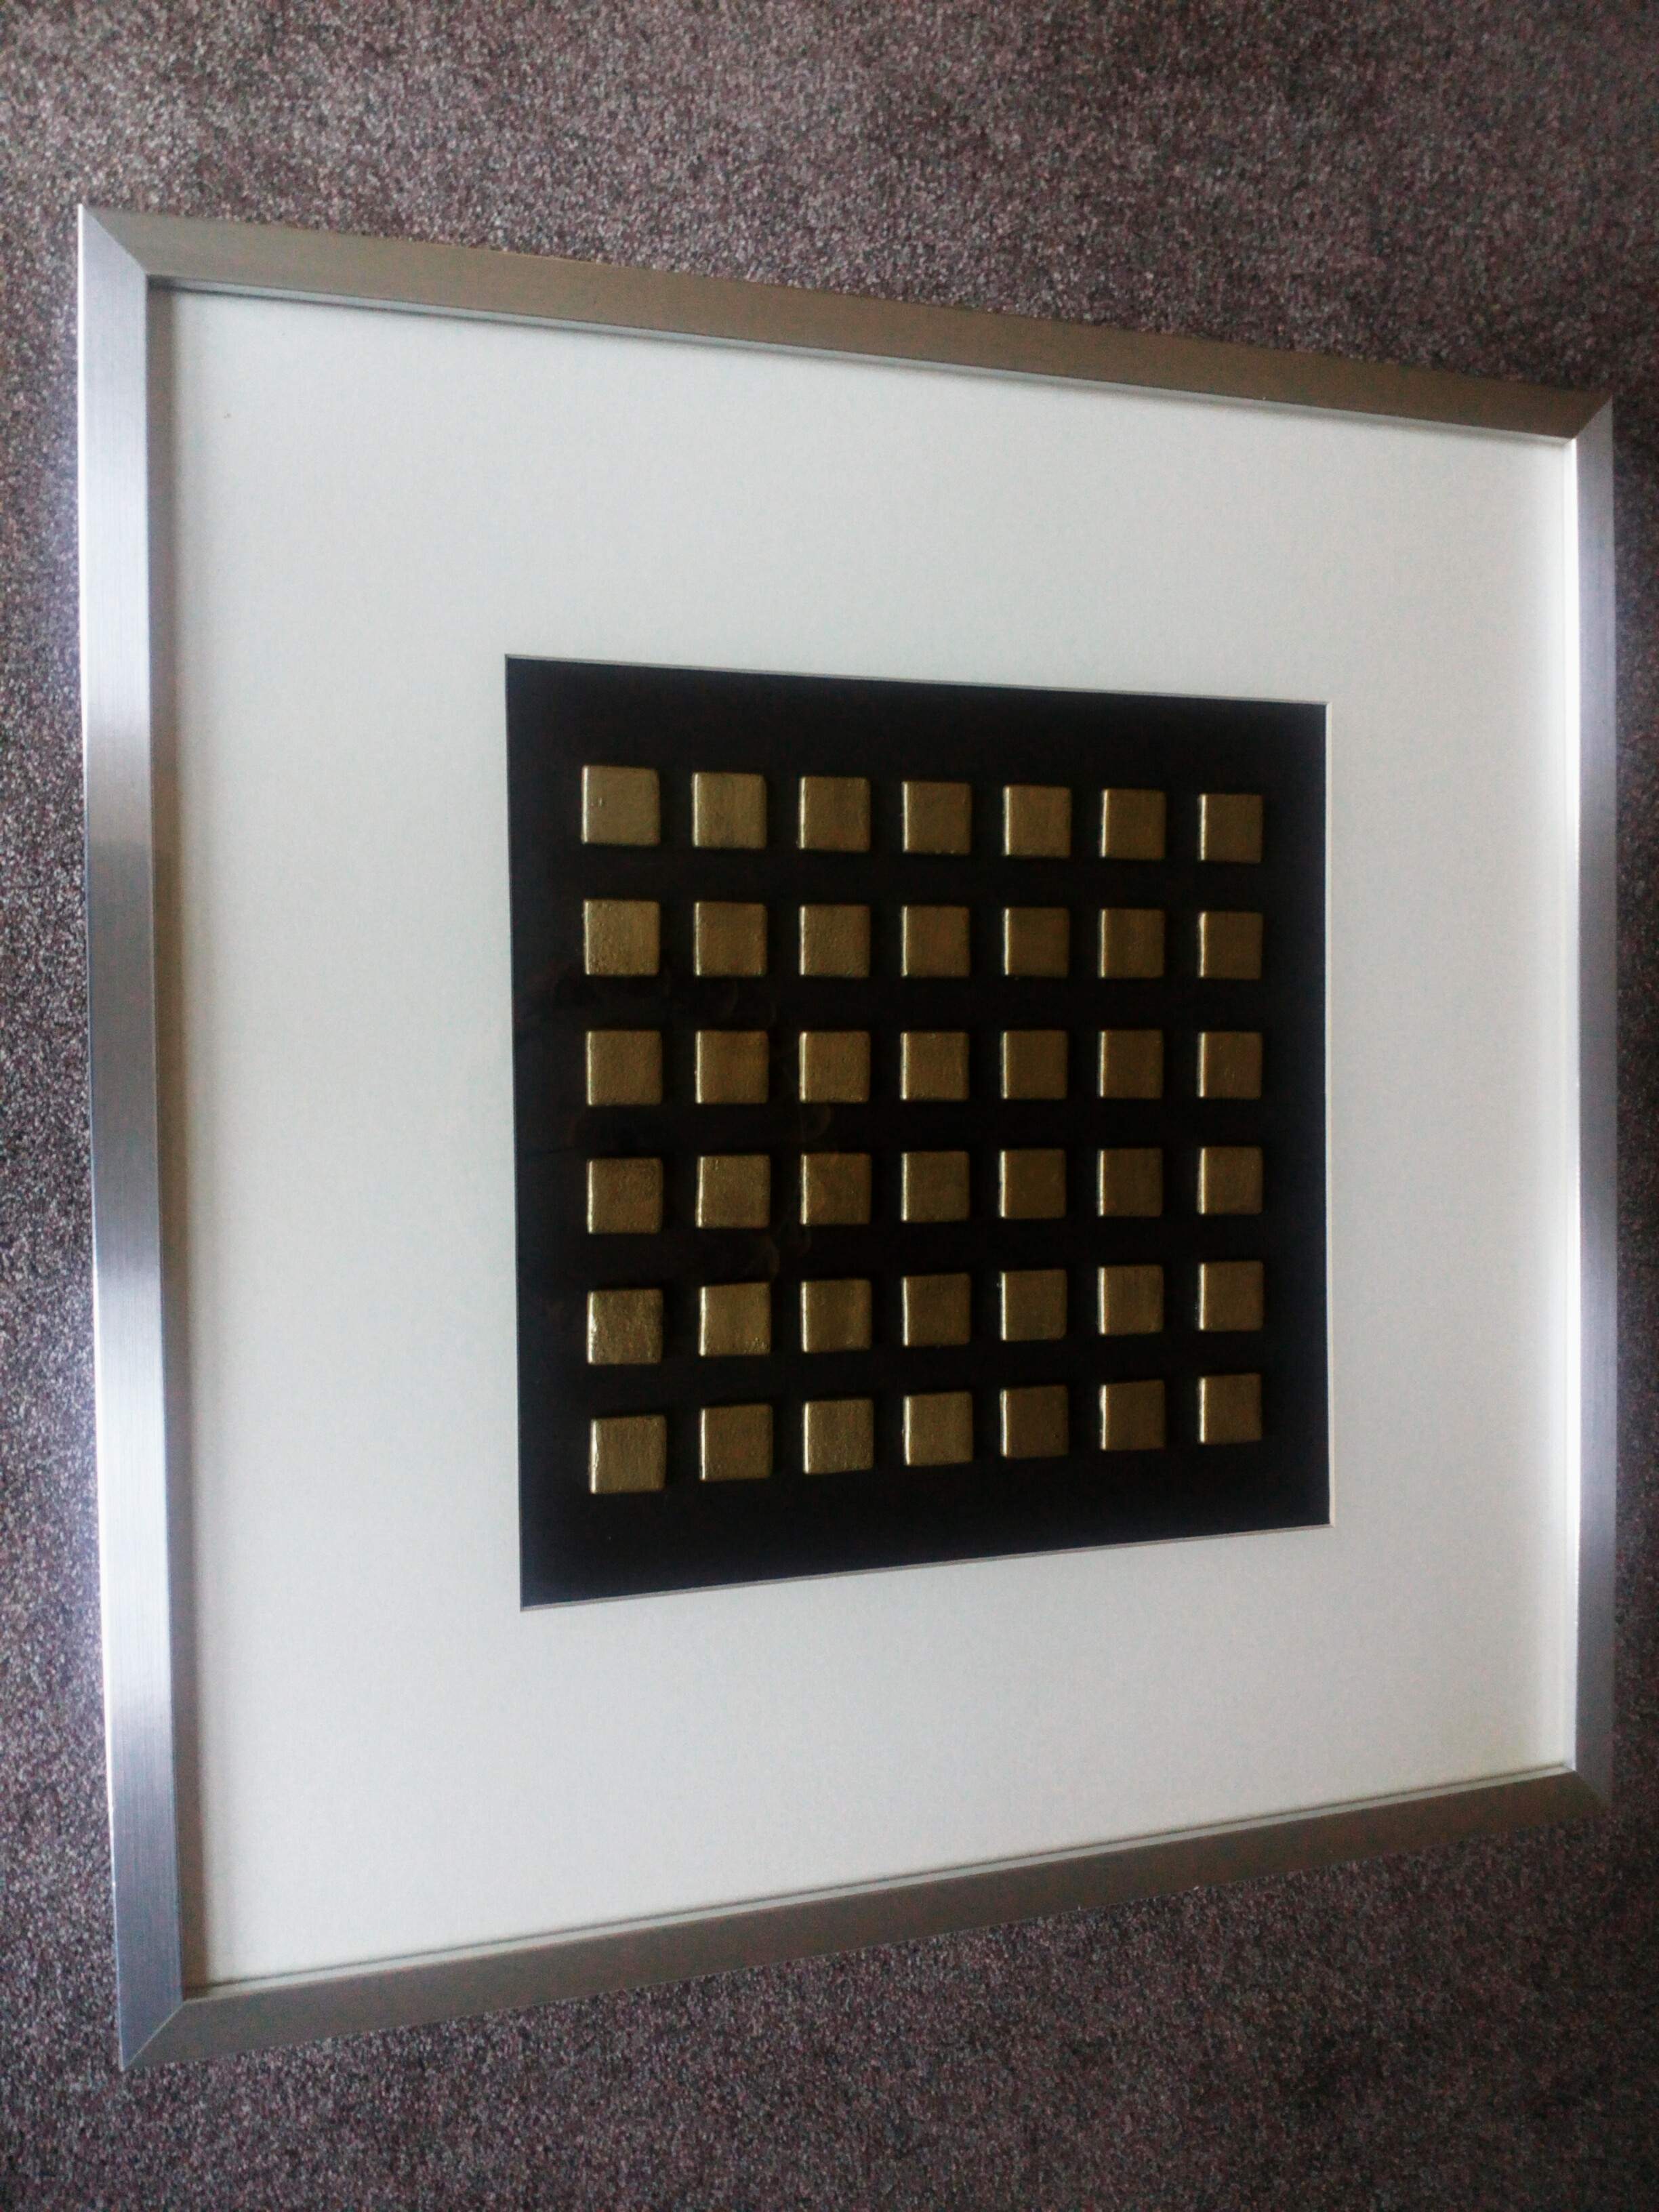 Gold glass tiles mounted on board. Brushed aluminium frame.